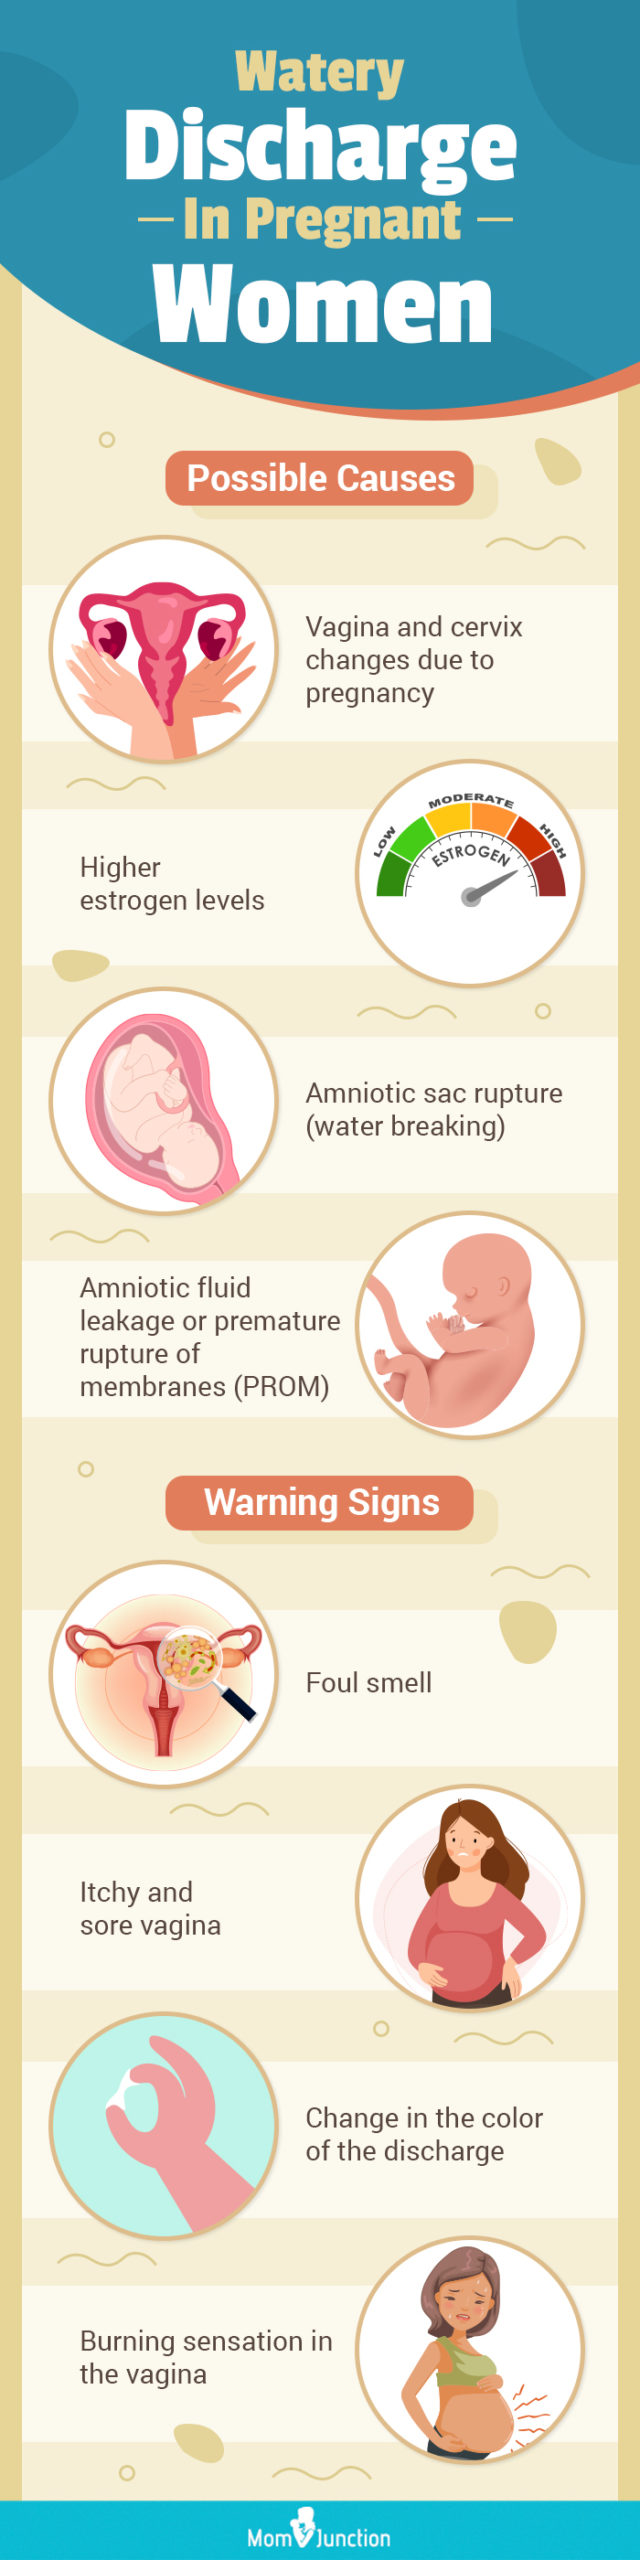 Is Having A Watery Discharge During Pregnancy Normal